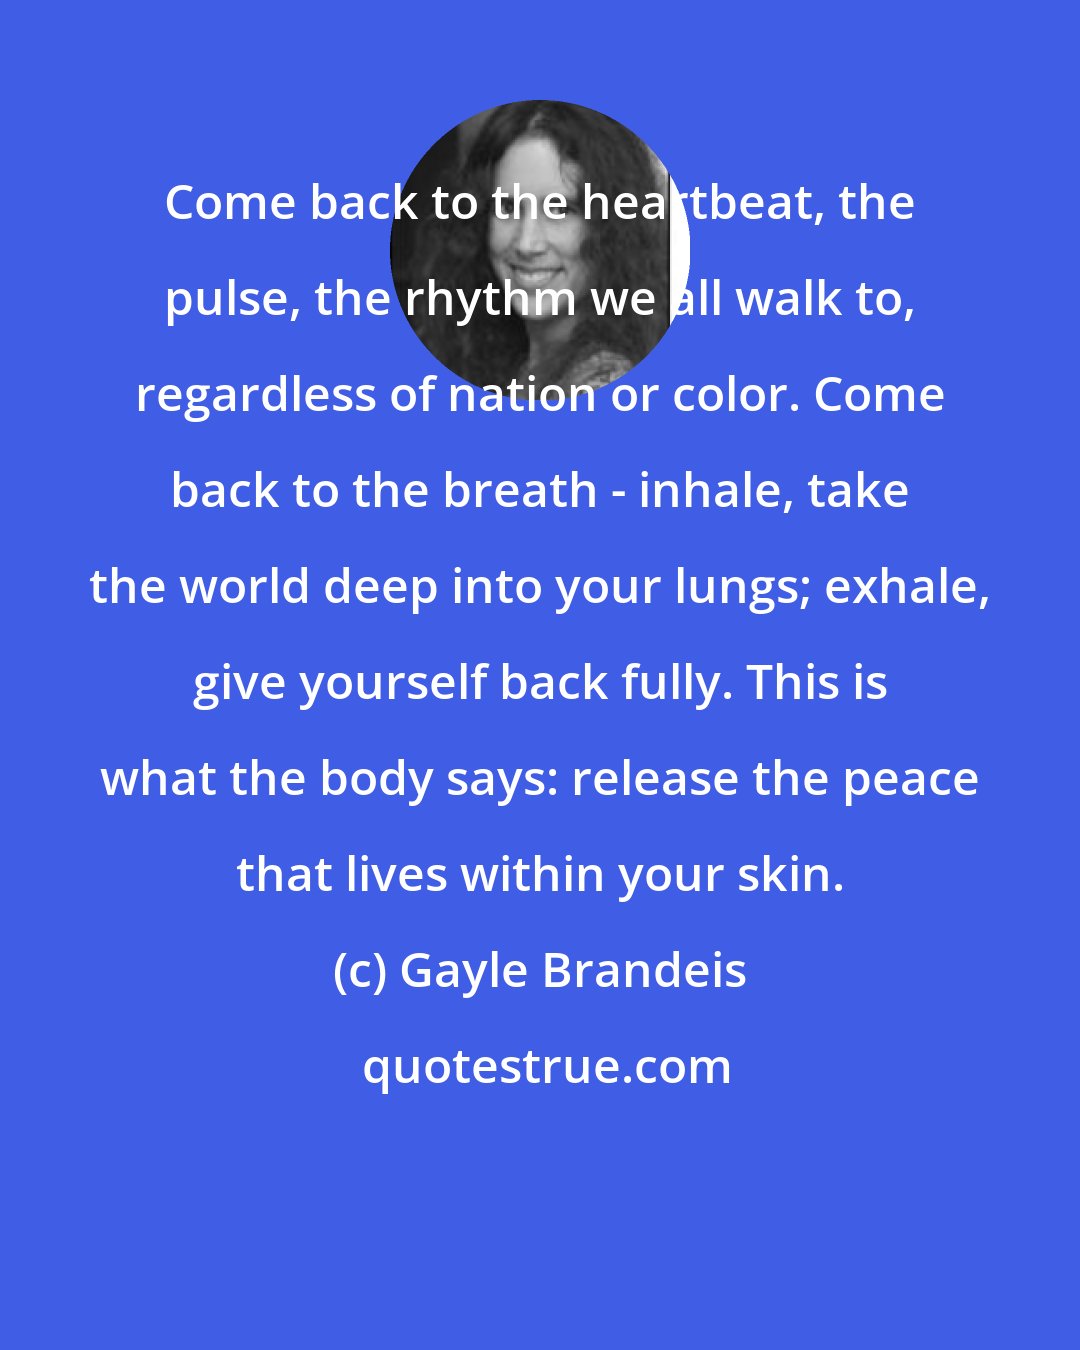 Gayle Brandeis: Come back to the heartbeat, the pulse, the rhythm we all walk to, regardless of nation or color. Come back to the breath - inhale, take the world deep into your lungs; exhale, give yourself back fully. This is what the body says: release the peace that lives within your skin.